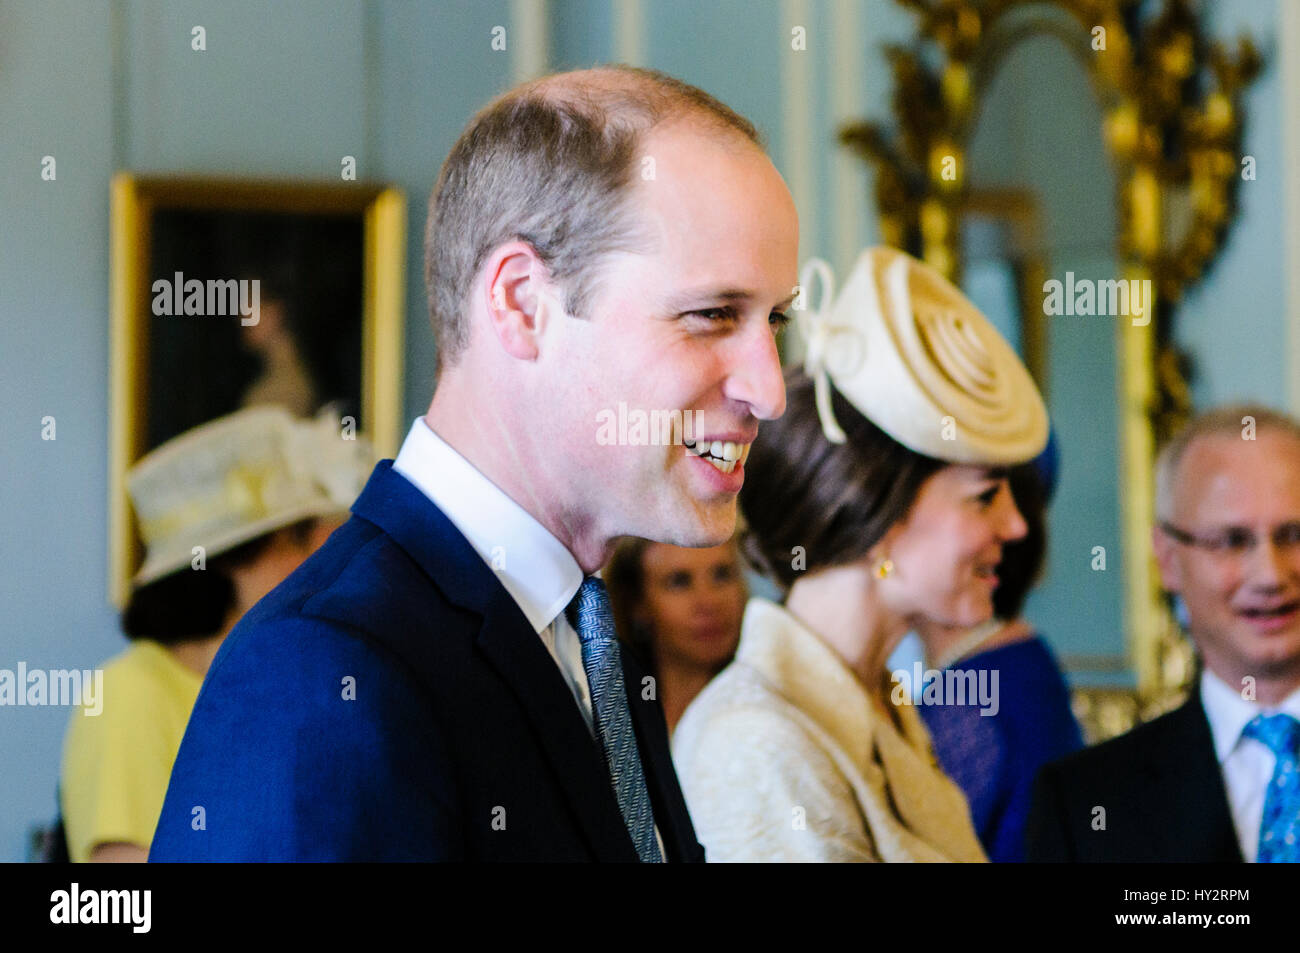 HILLSBOROUGH, NORTHERN IRELAND. 14 JUN 2016: Prince William, The Duke of Cambridge meets guests ahead of the the Secretary of State's annual garden party. Stock Photo